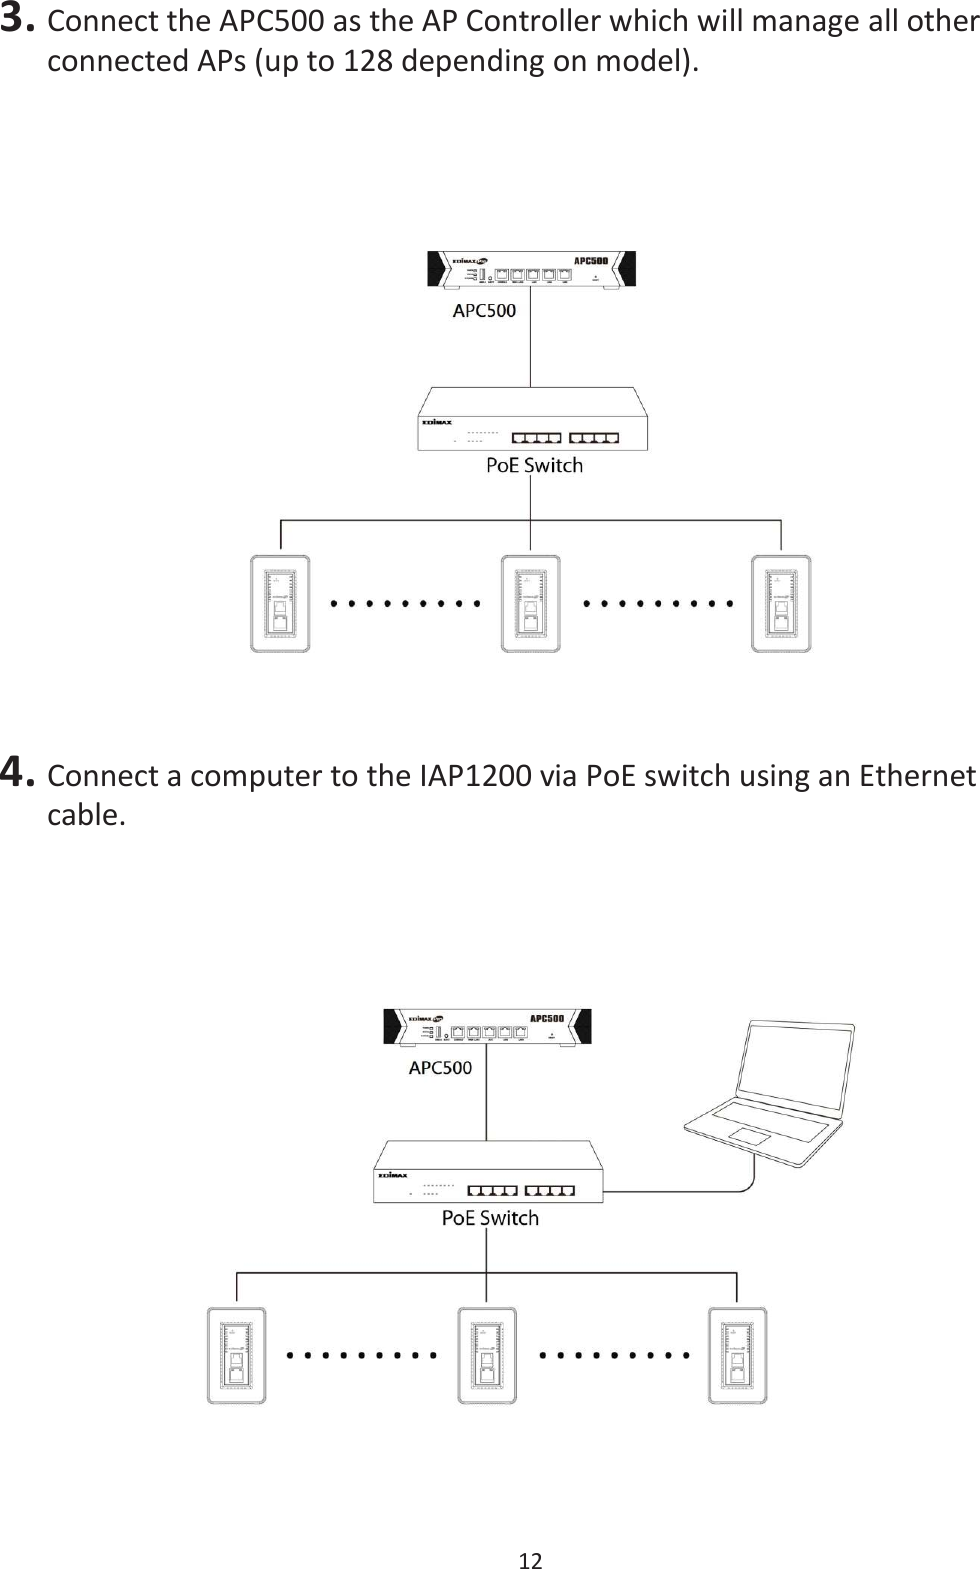 12  3. Connect the APC500 as the AP Controller which will manage all other connected APs (up to 128 depending on model).  4. Connect a computer to the IAP1200 via PoE switch using an Ethernet cable.  